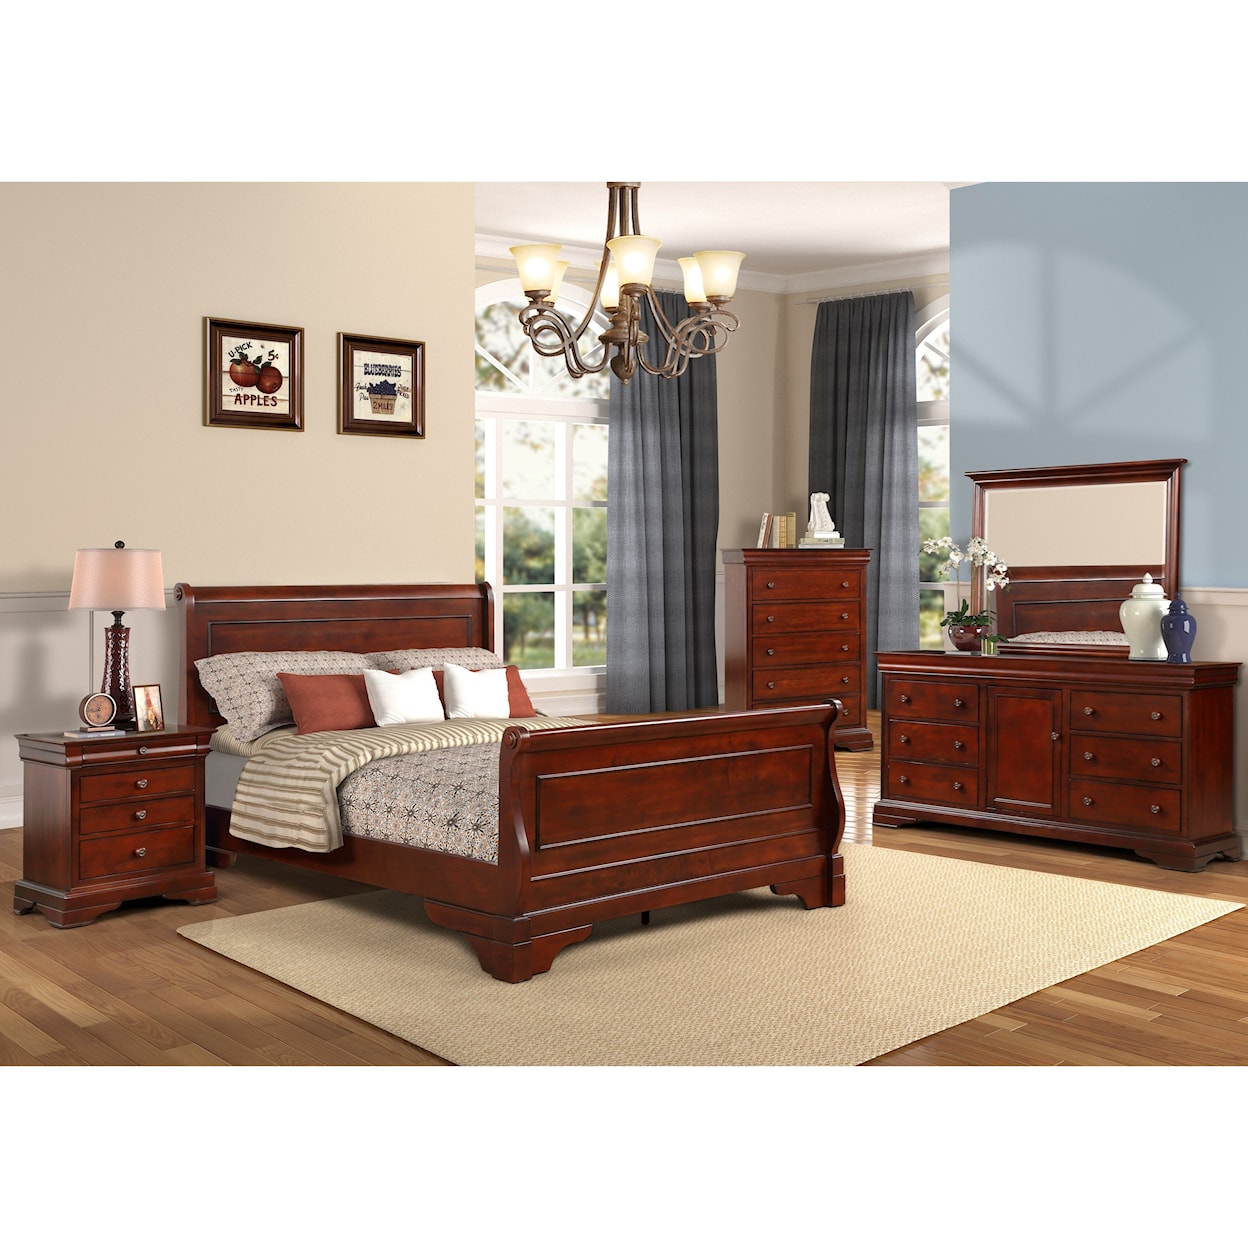 New Classic Versaille King Bedroom Group